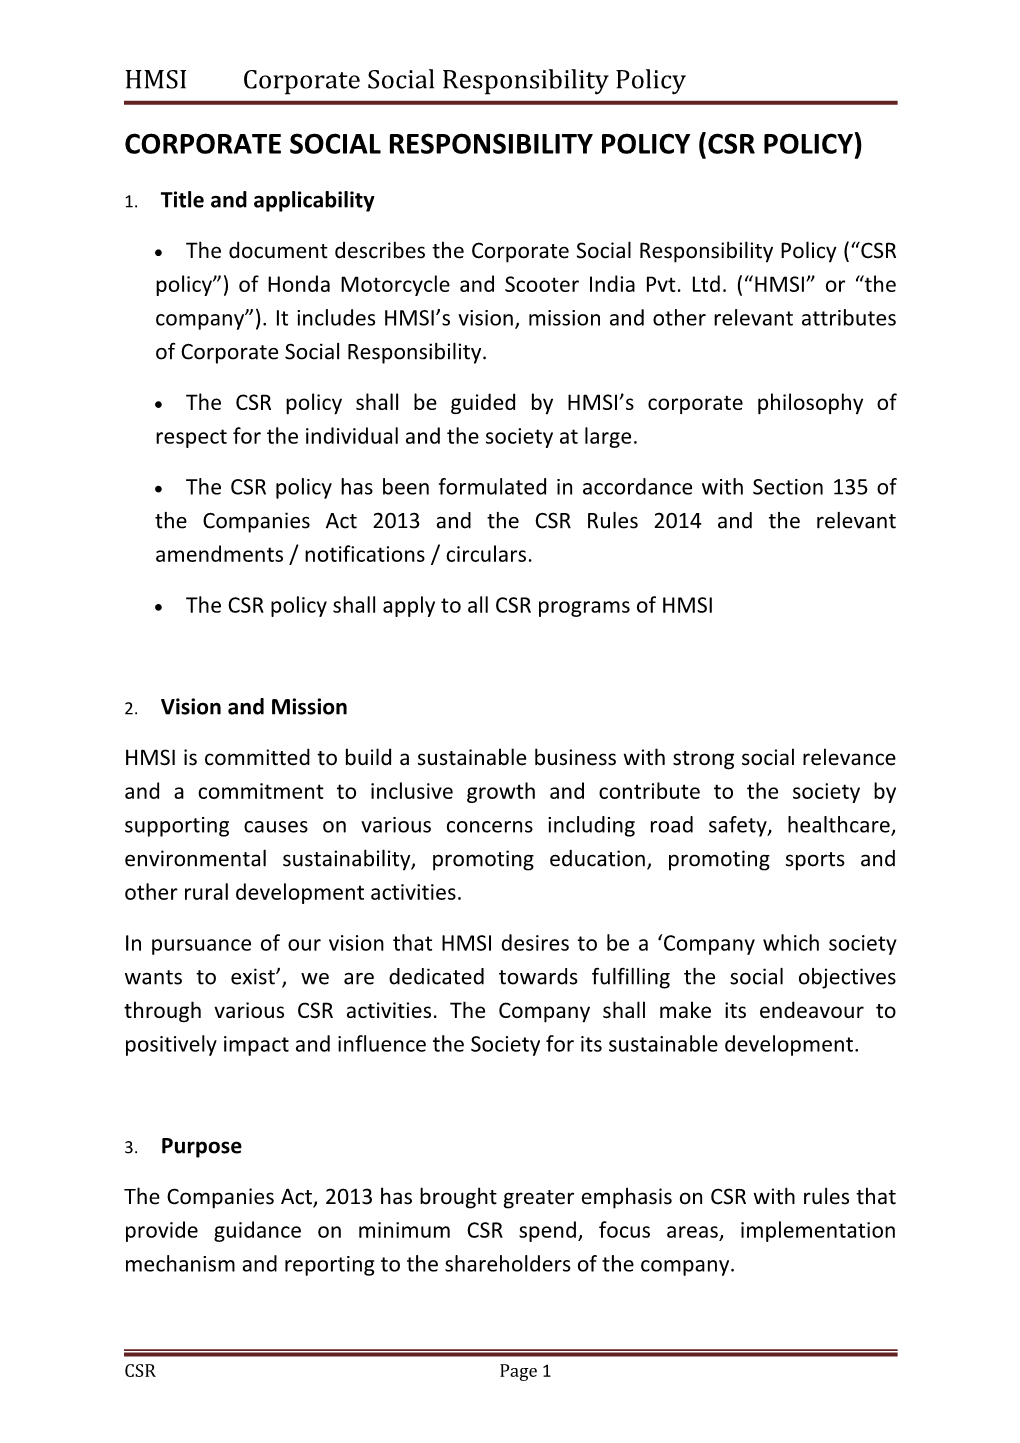 Corporate Social Responsibility Policy (Csr Policy)